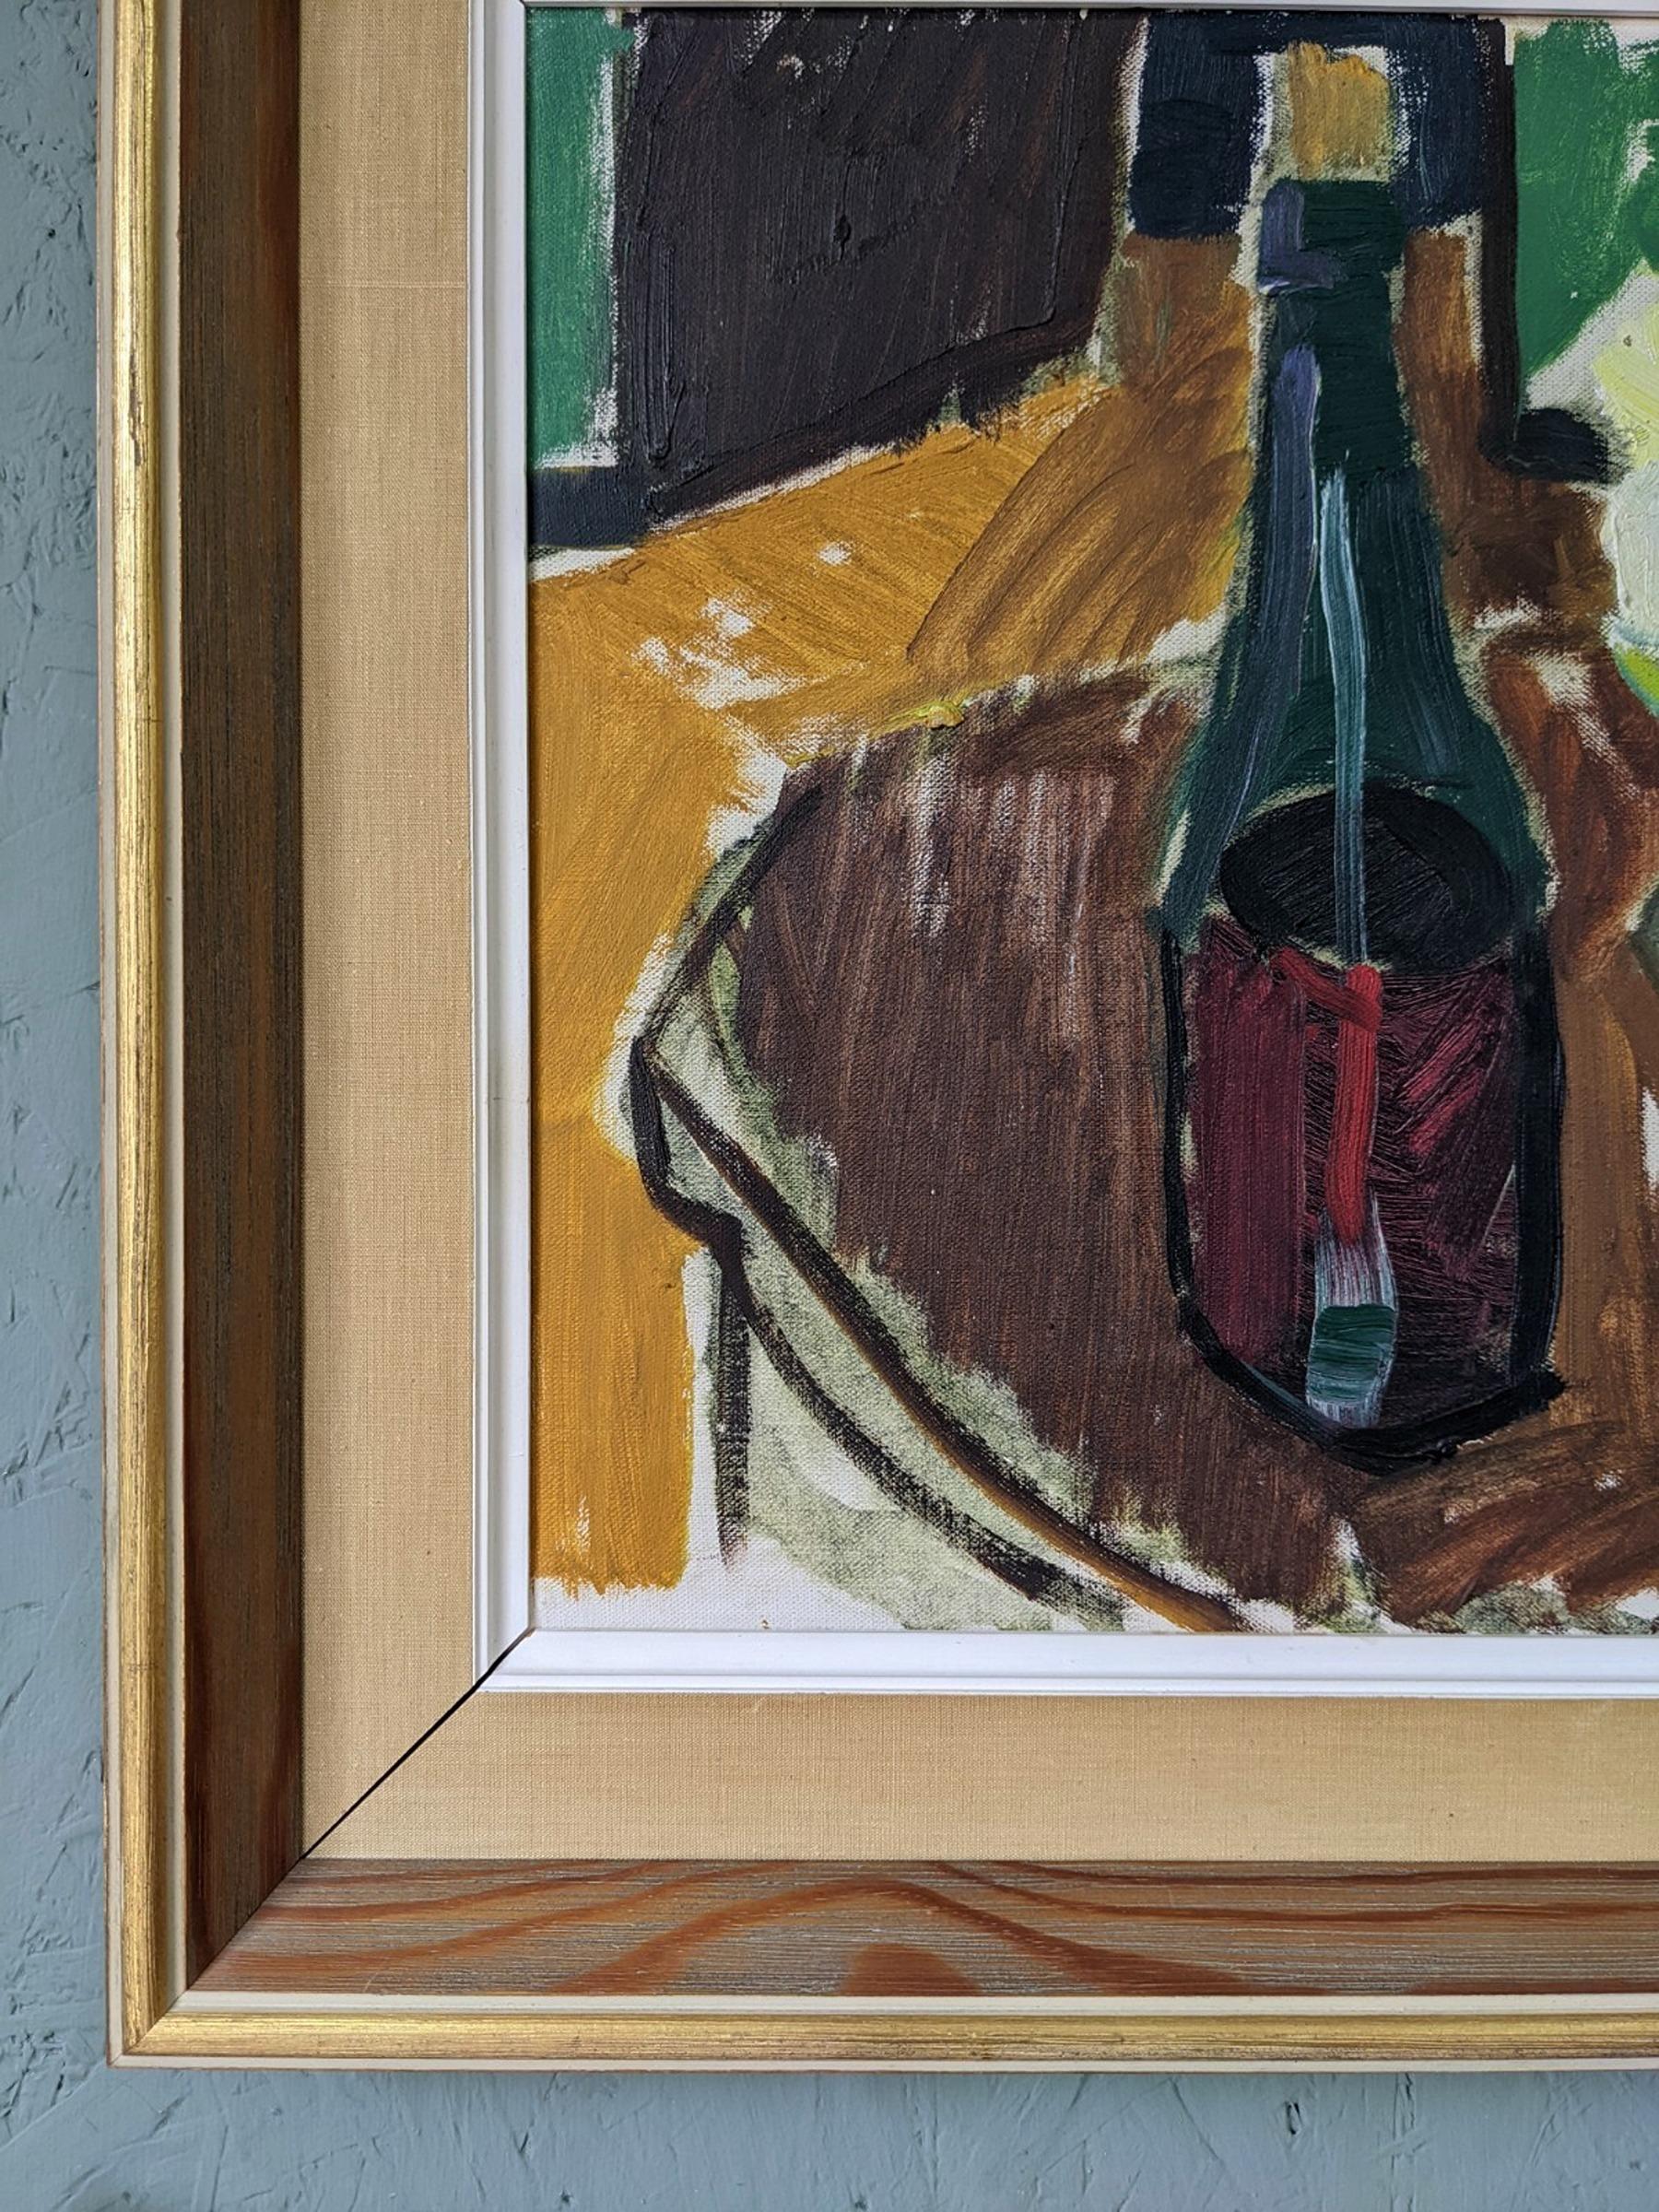 1955 Vintage Mid-Century Swedish  Still Life Oil Painting - Homely Reminisce 7